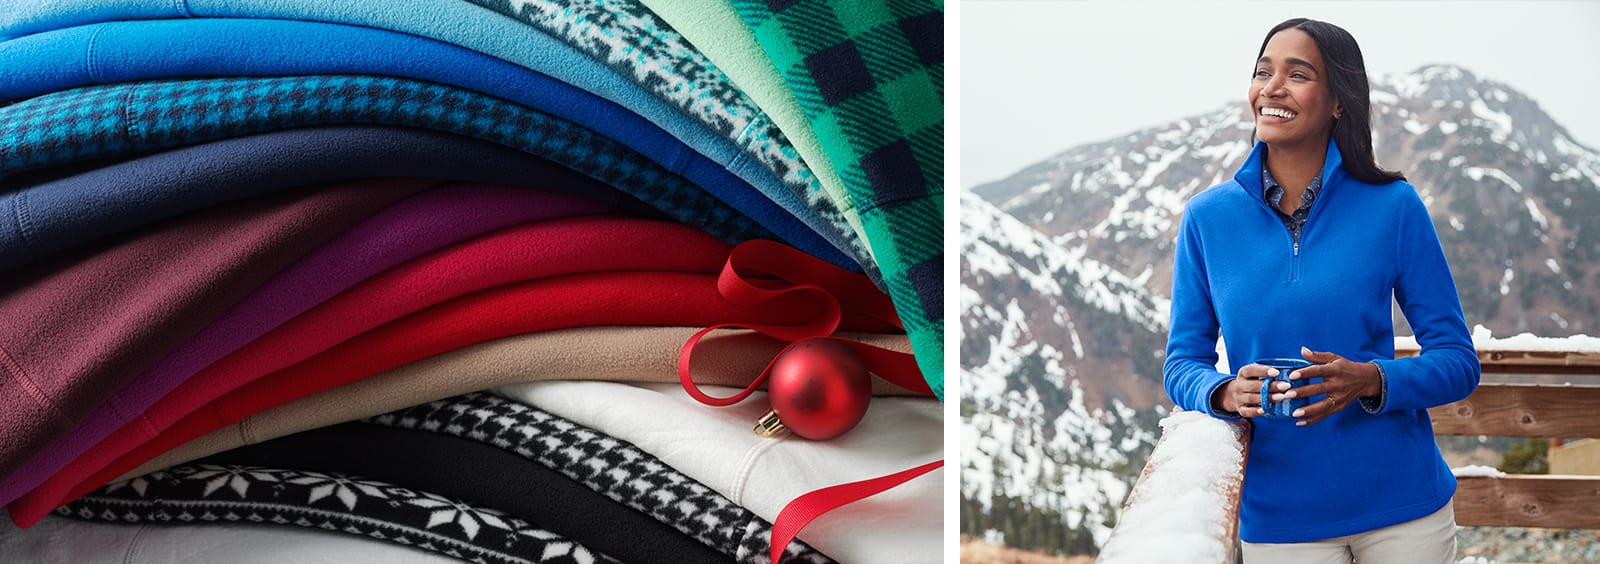 A Guide to Shopping for Thermal Clothing